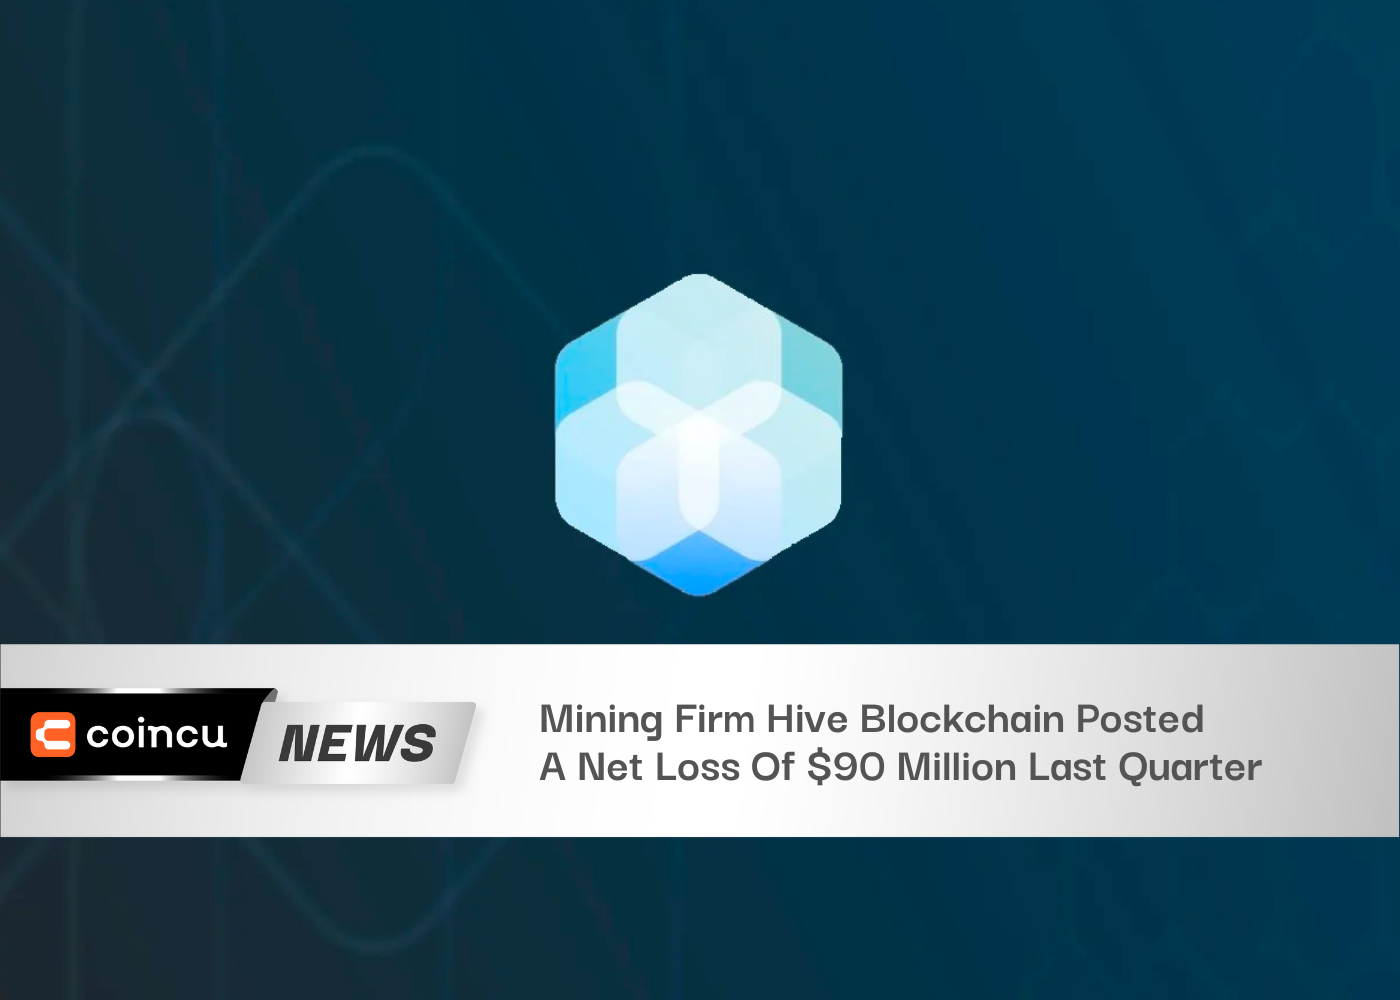 Mining Firm Hive Blockchain Posted A Net Loss Of $90 Million Last Quarter